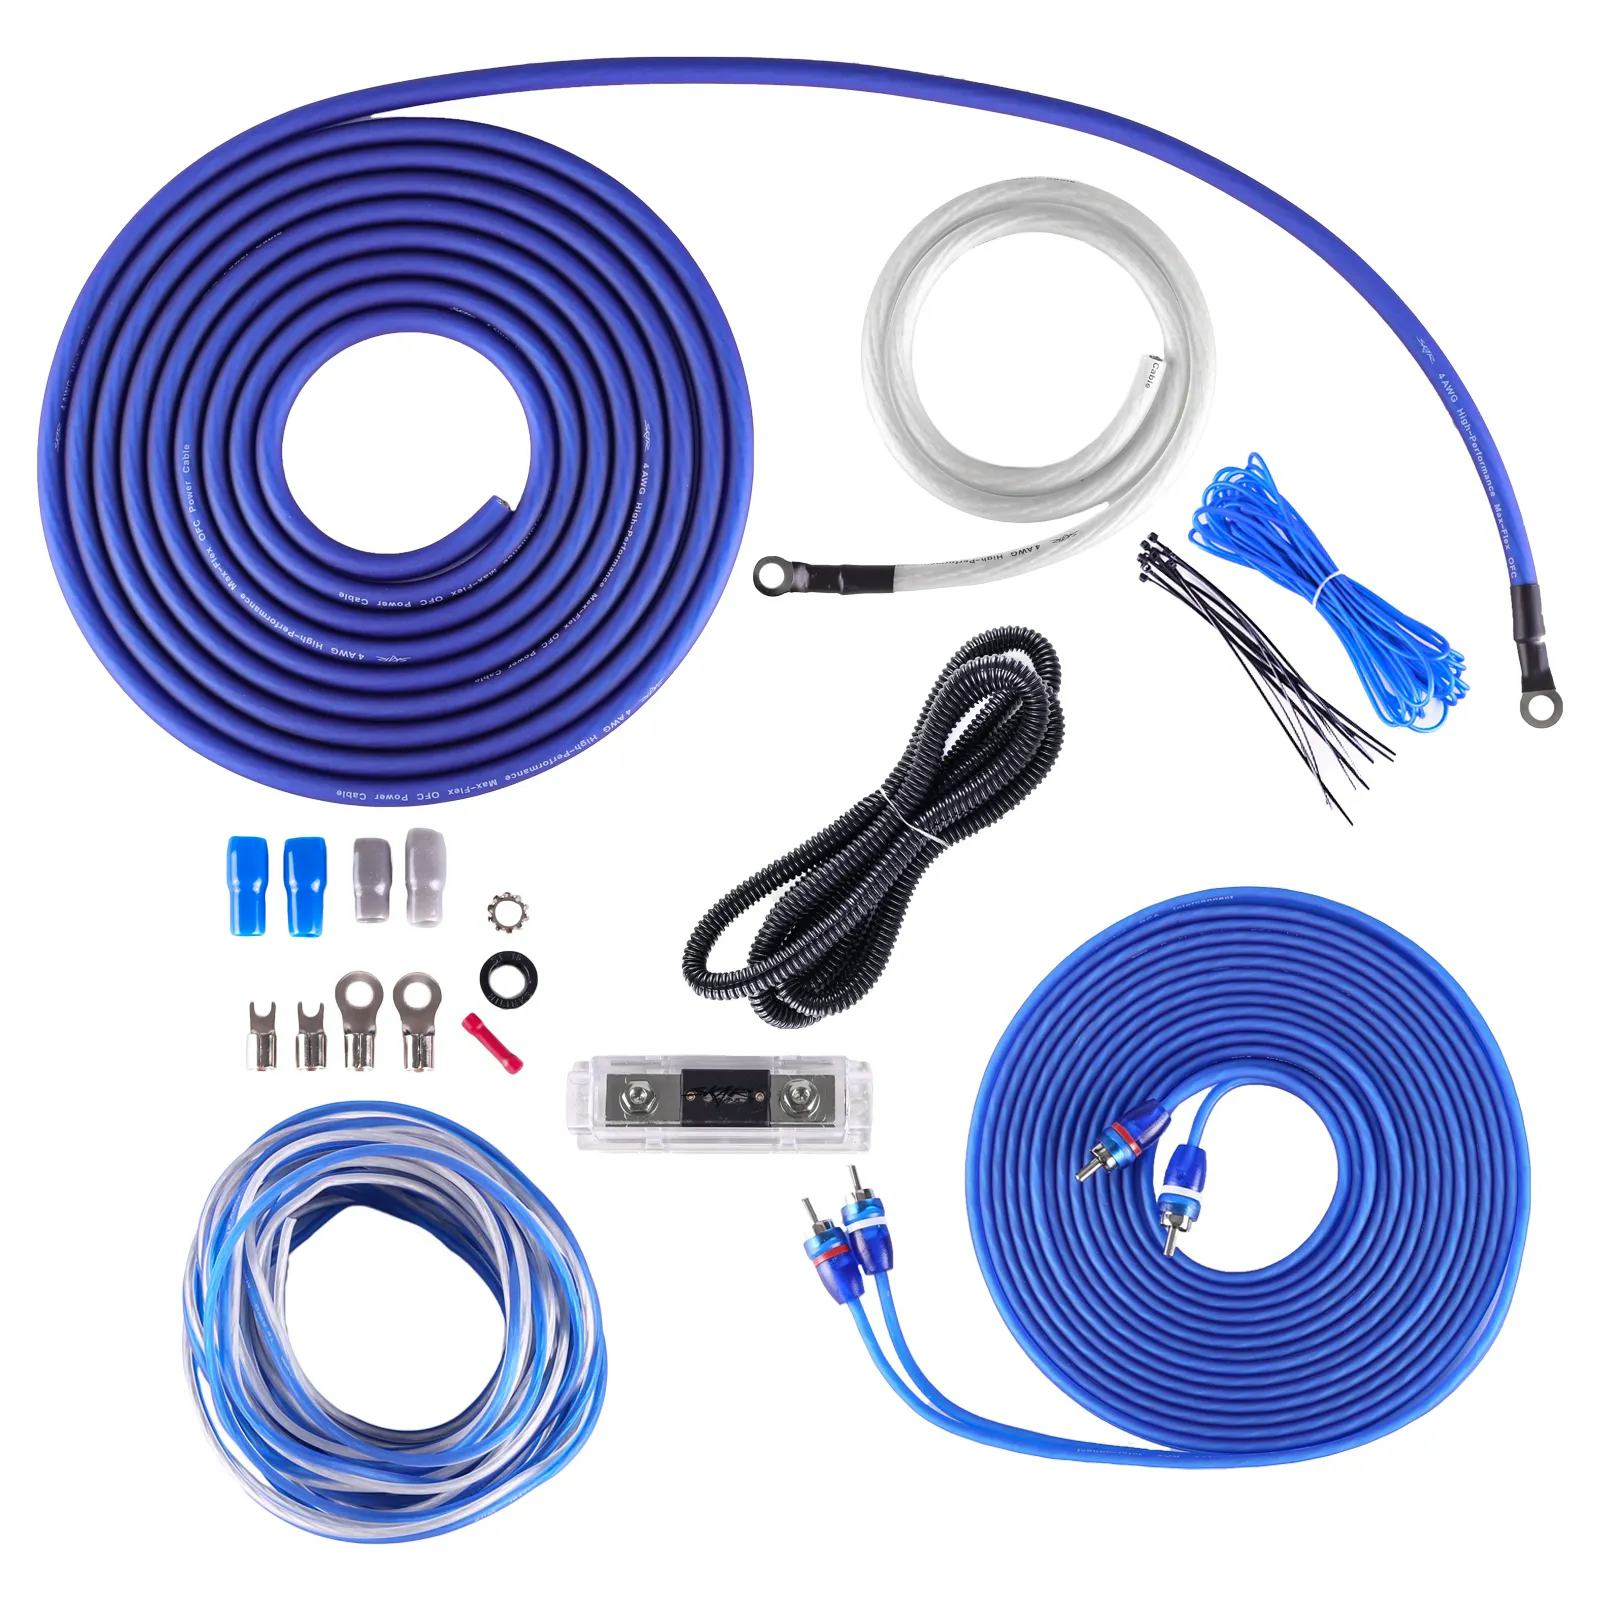 Car Audio Speakers Wiring kits Cable Amplifier Subwoofer Speaker  Installation Wires Kit 10GA Power Cable 